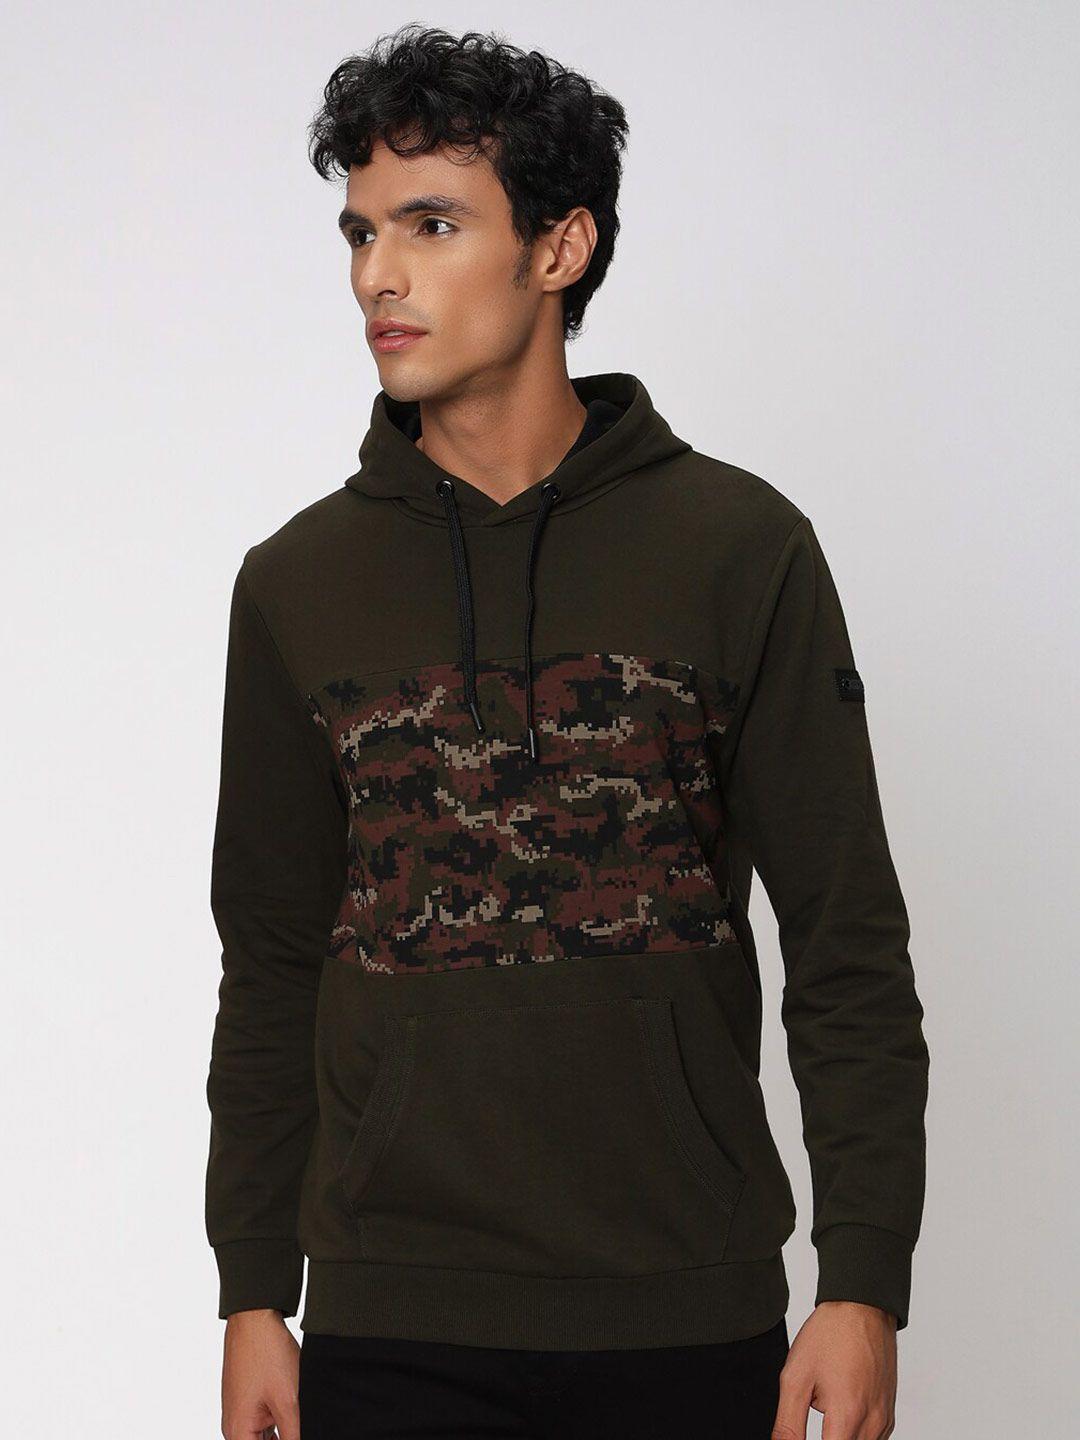 mufti camouflage printed hooded pullover sweatshirt